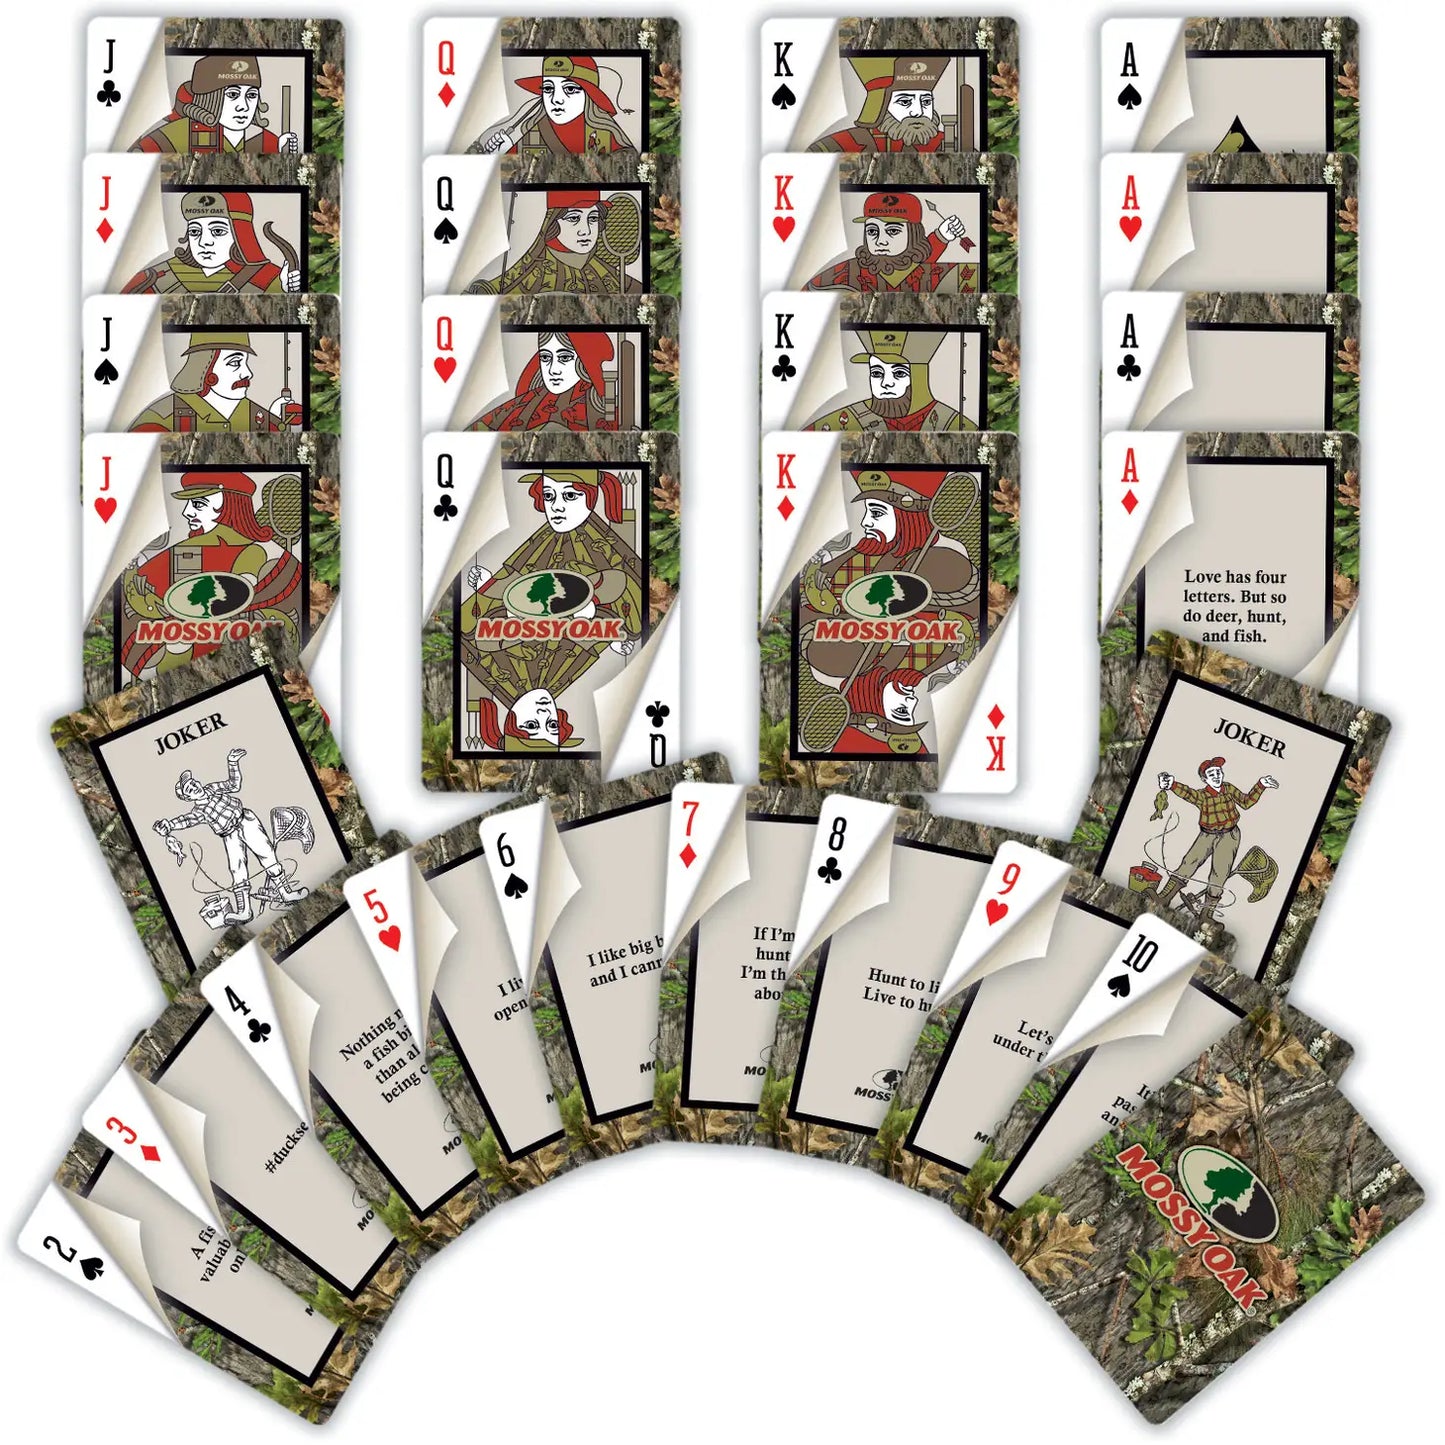 Mossy Oak Playing Cards